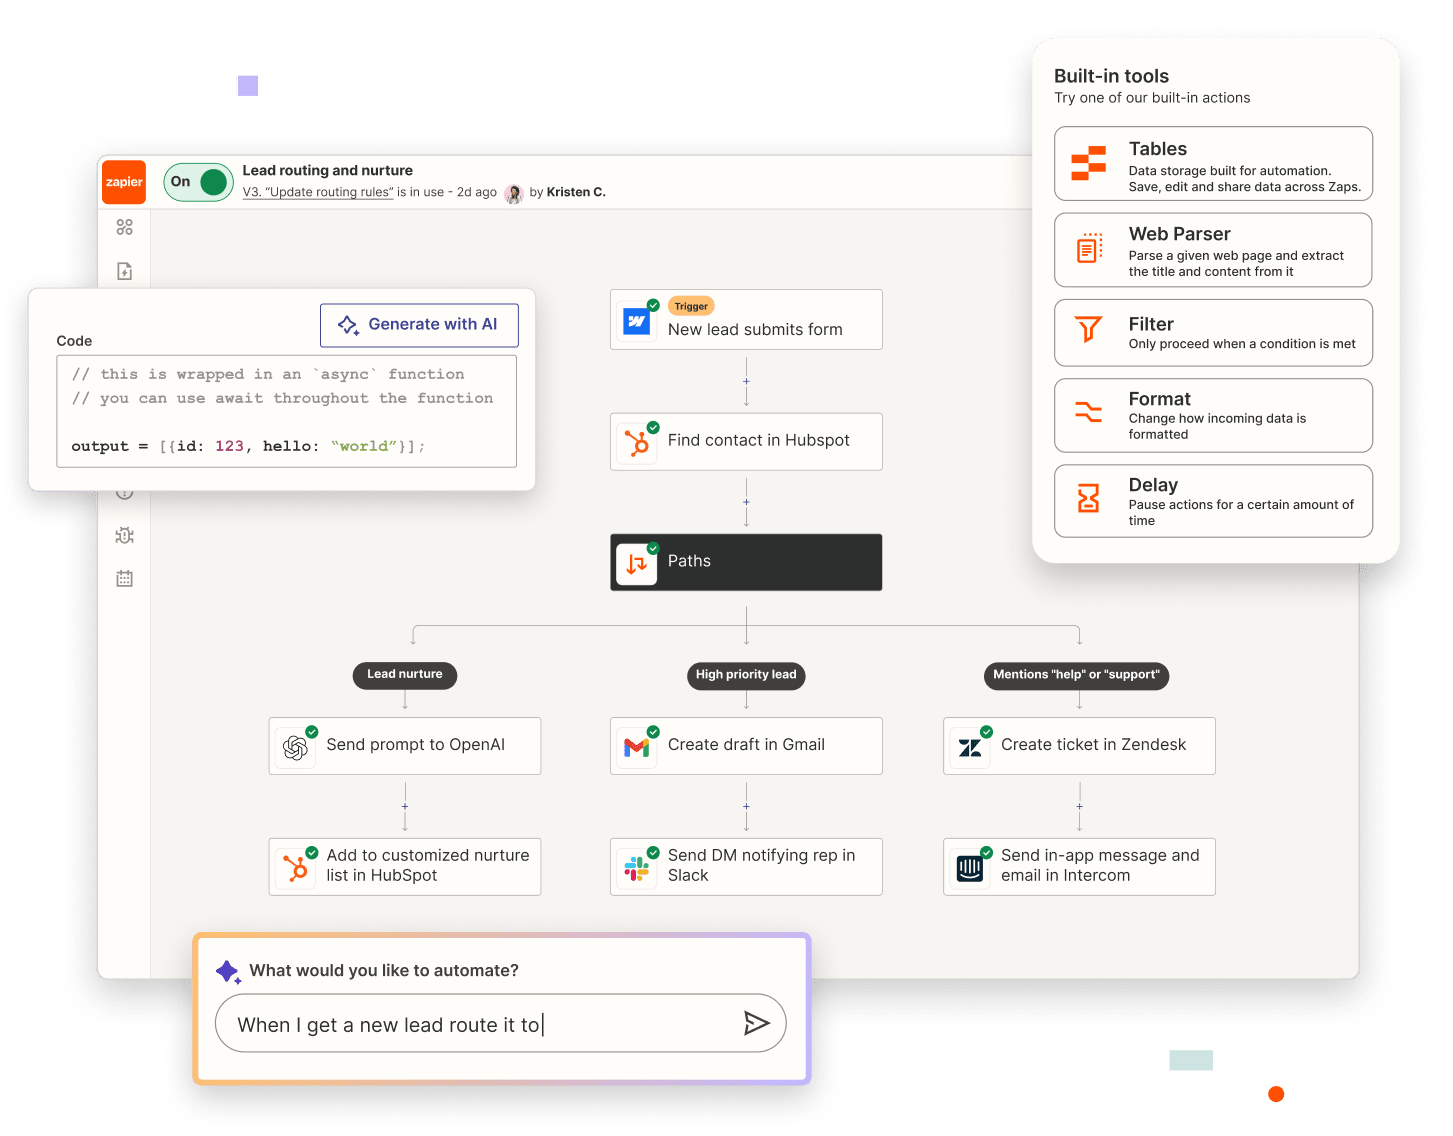  An interface of multi-step path workflow featuring Co-pilot, Built-in tools, and code step.